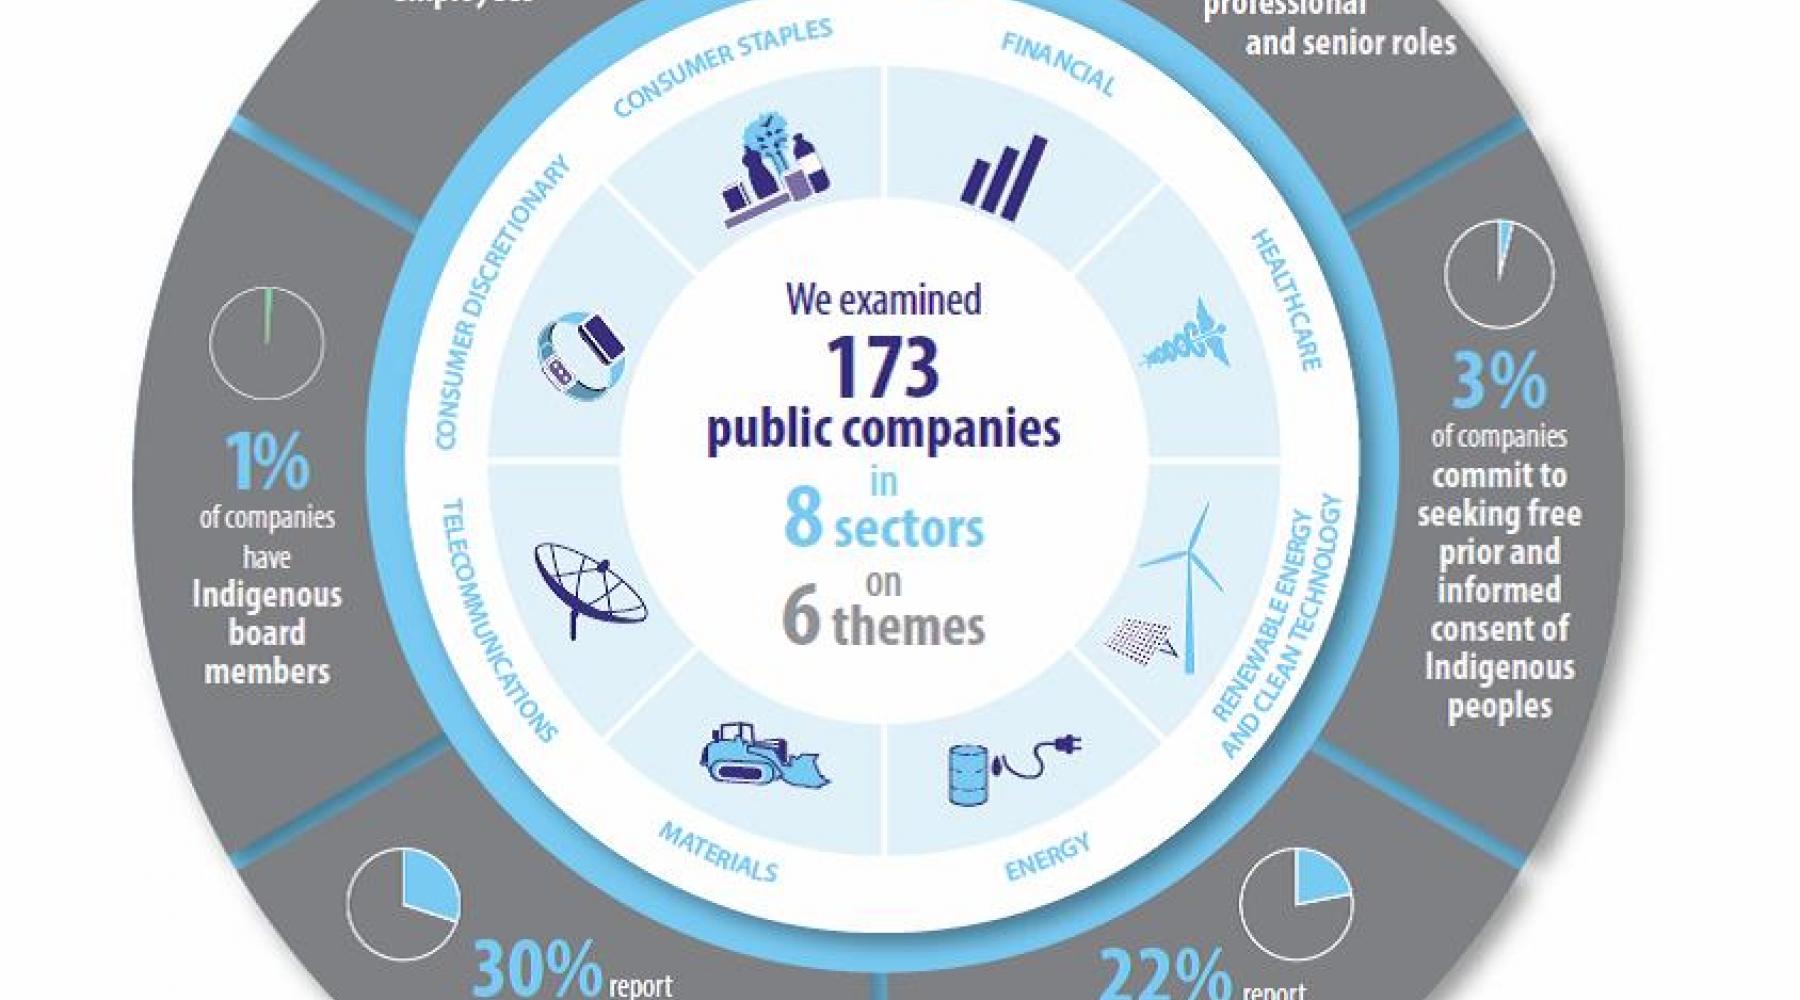 We examined 173 public comapnies across 8 themes.